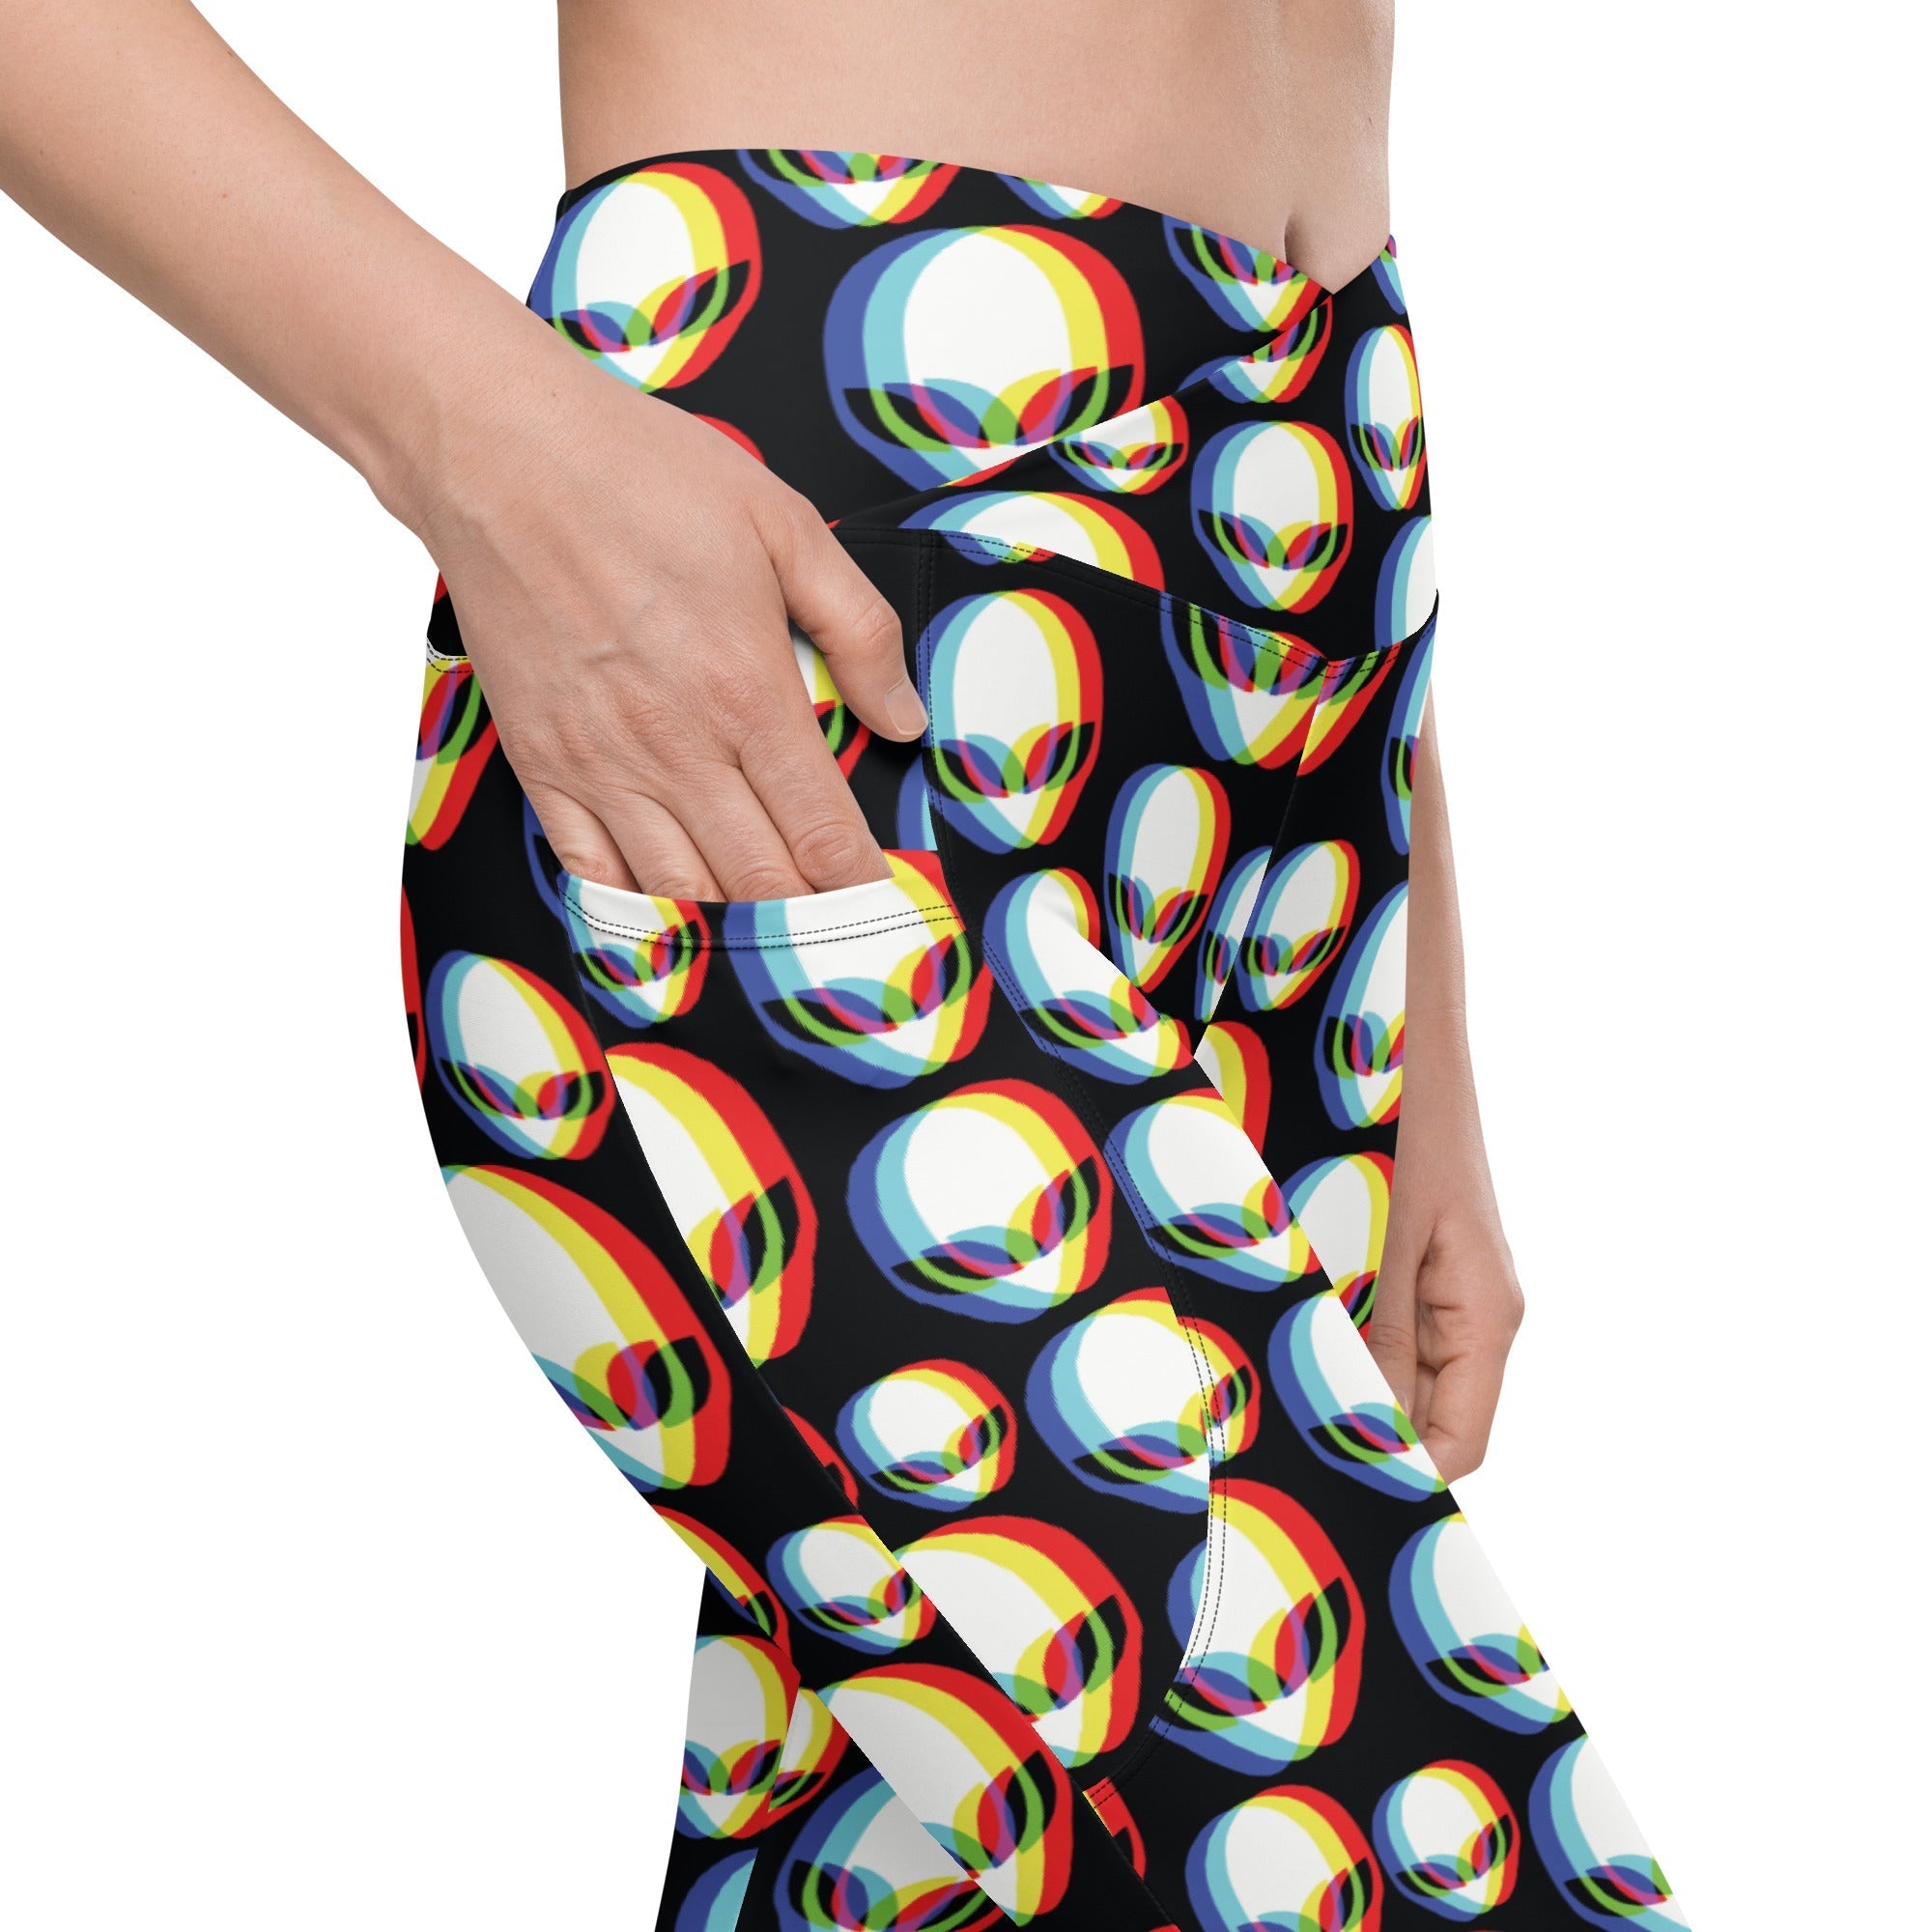 Trippy Alien Crossover Leggings With Pockets